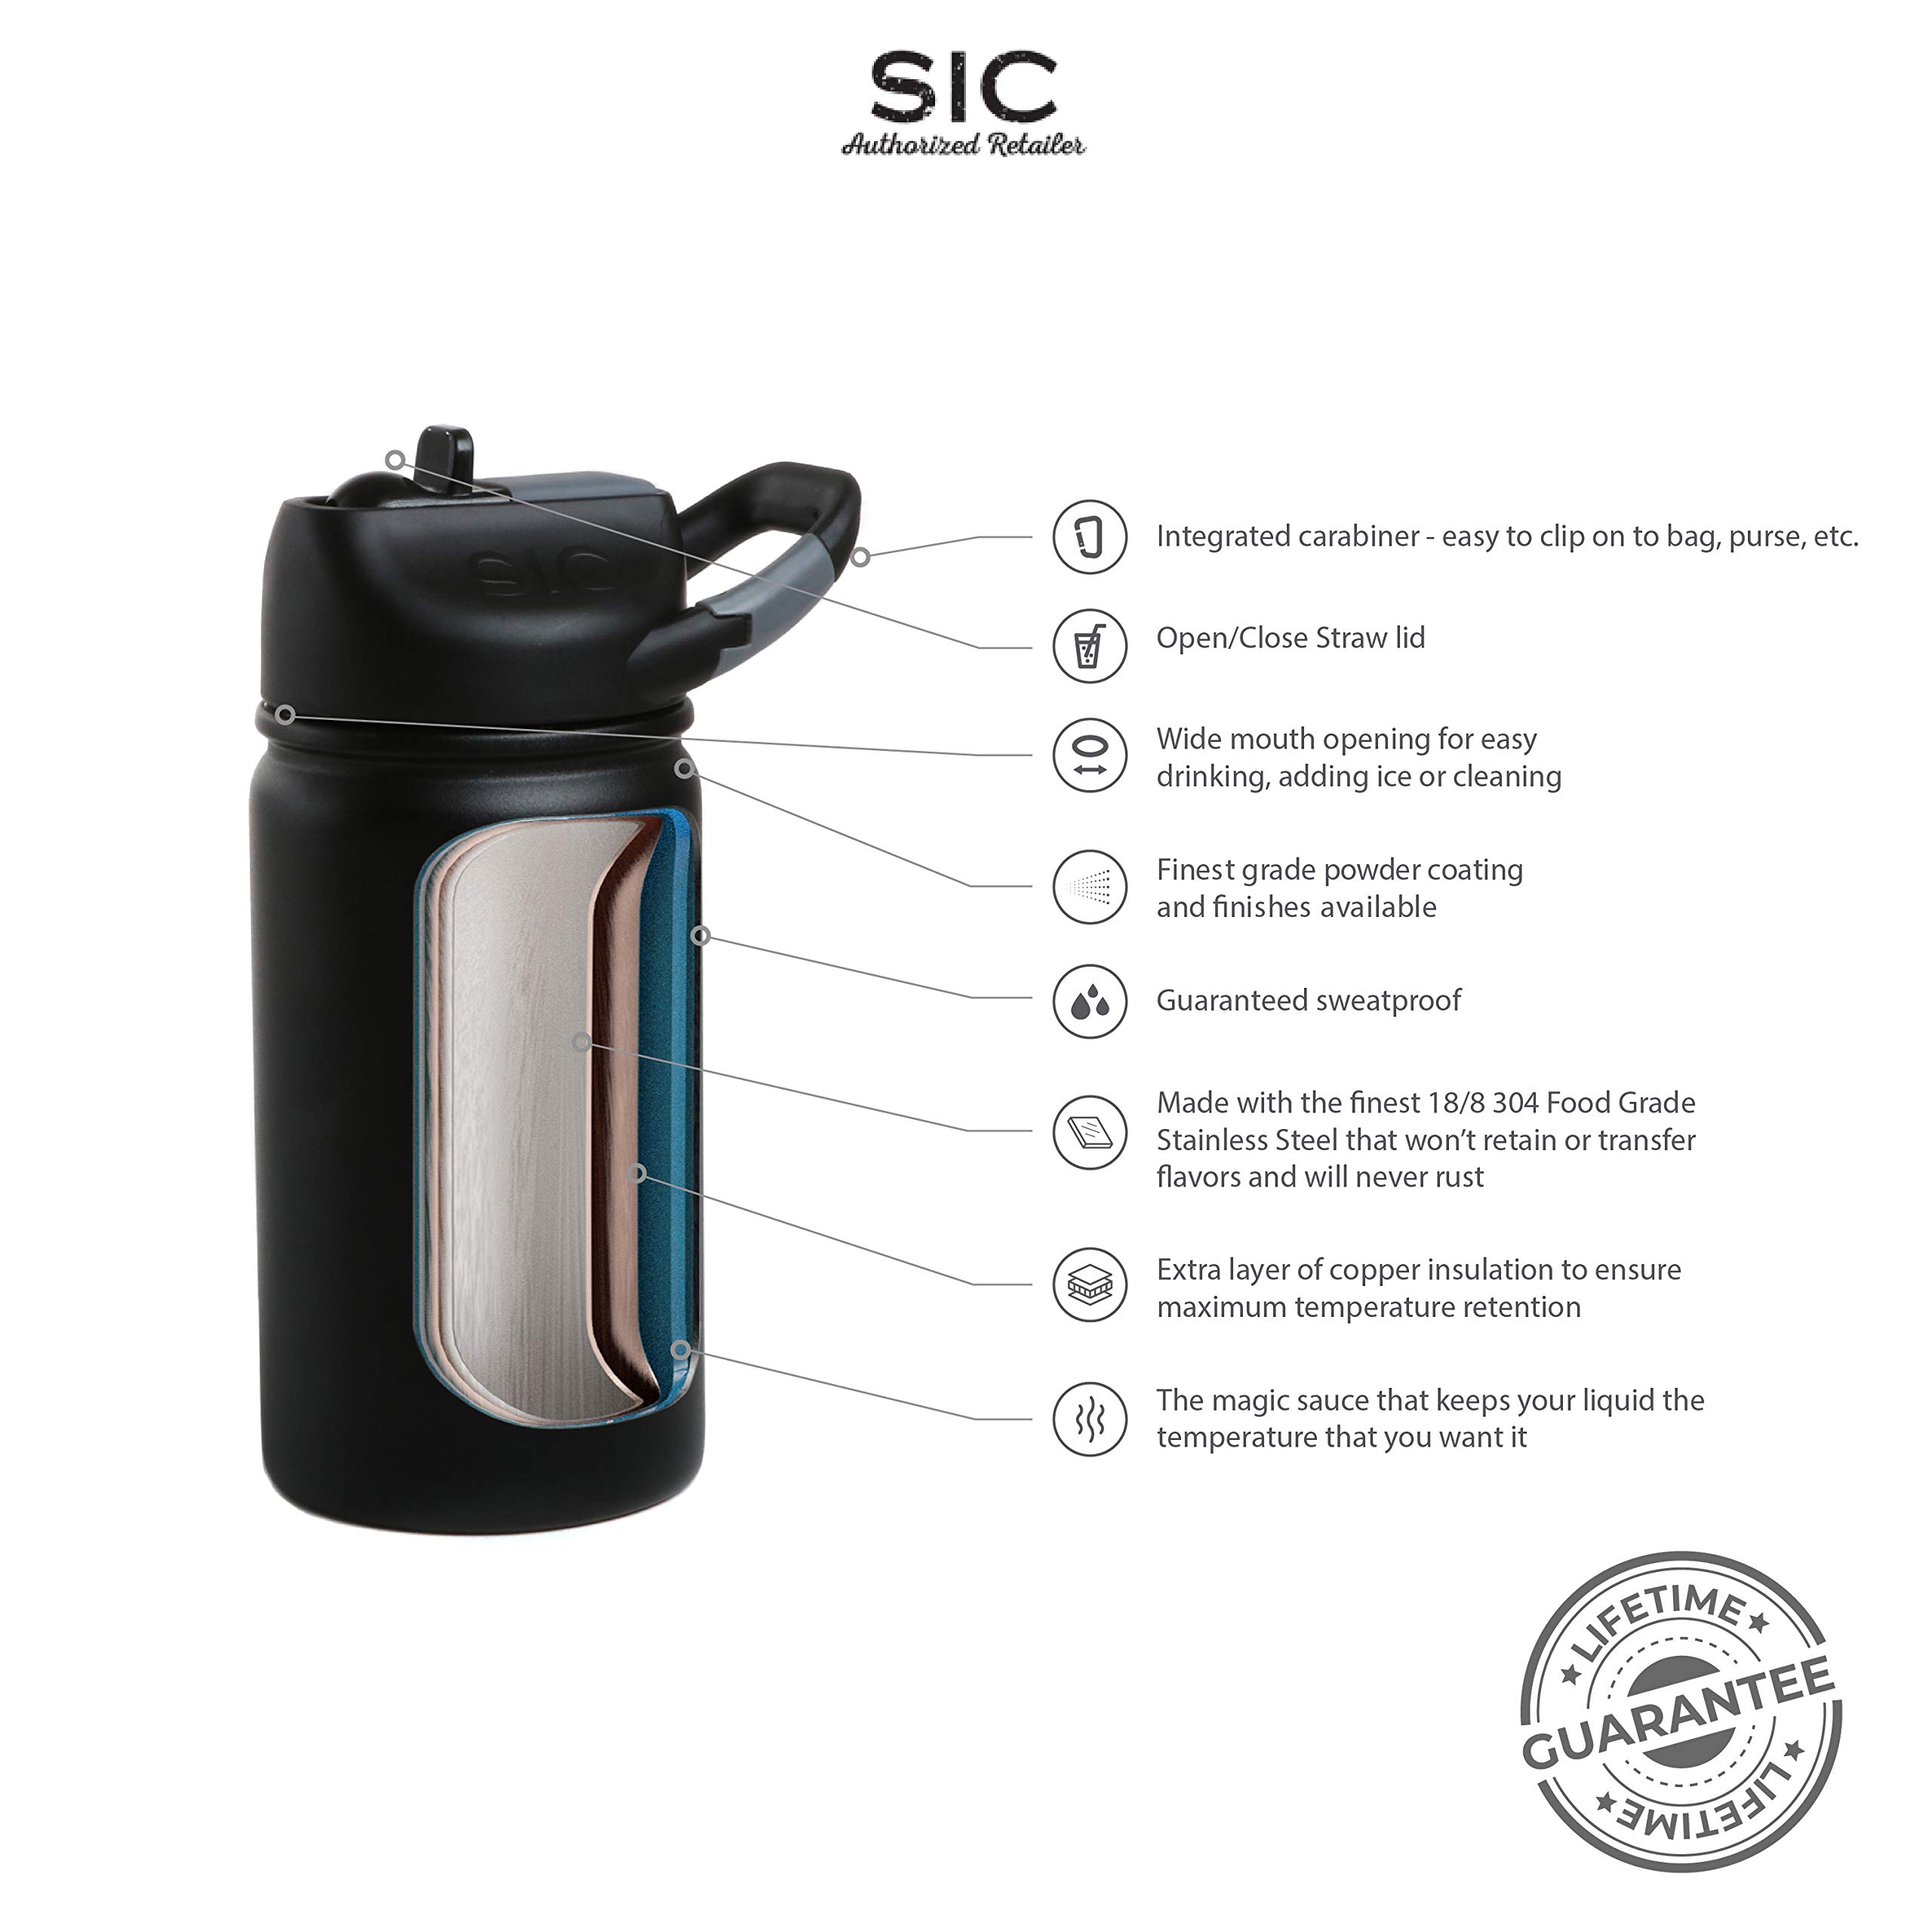 Seriously Ice Cold Kids’ Lil SIC 12oz Insulated Tumbler Mug, Premium Double Wall Stainless Steel, Leak Proof BPA Free Lid with Carabiner Clip (Ice White)